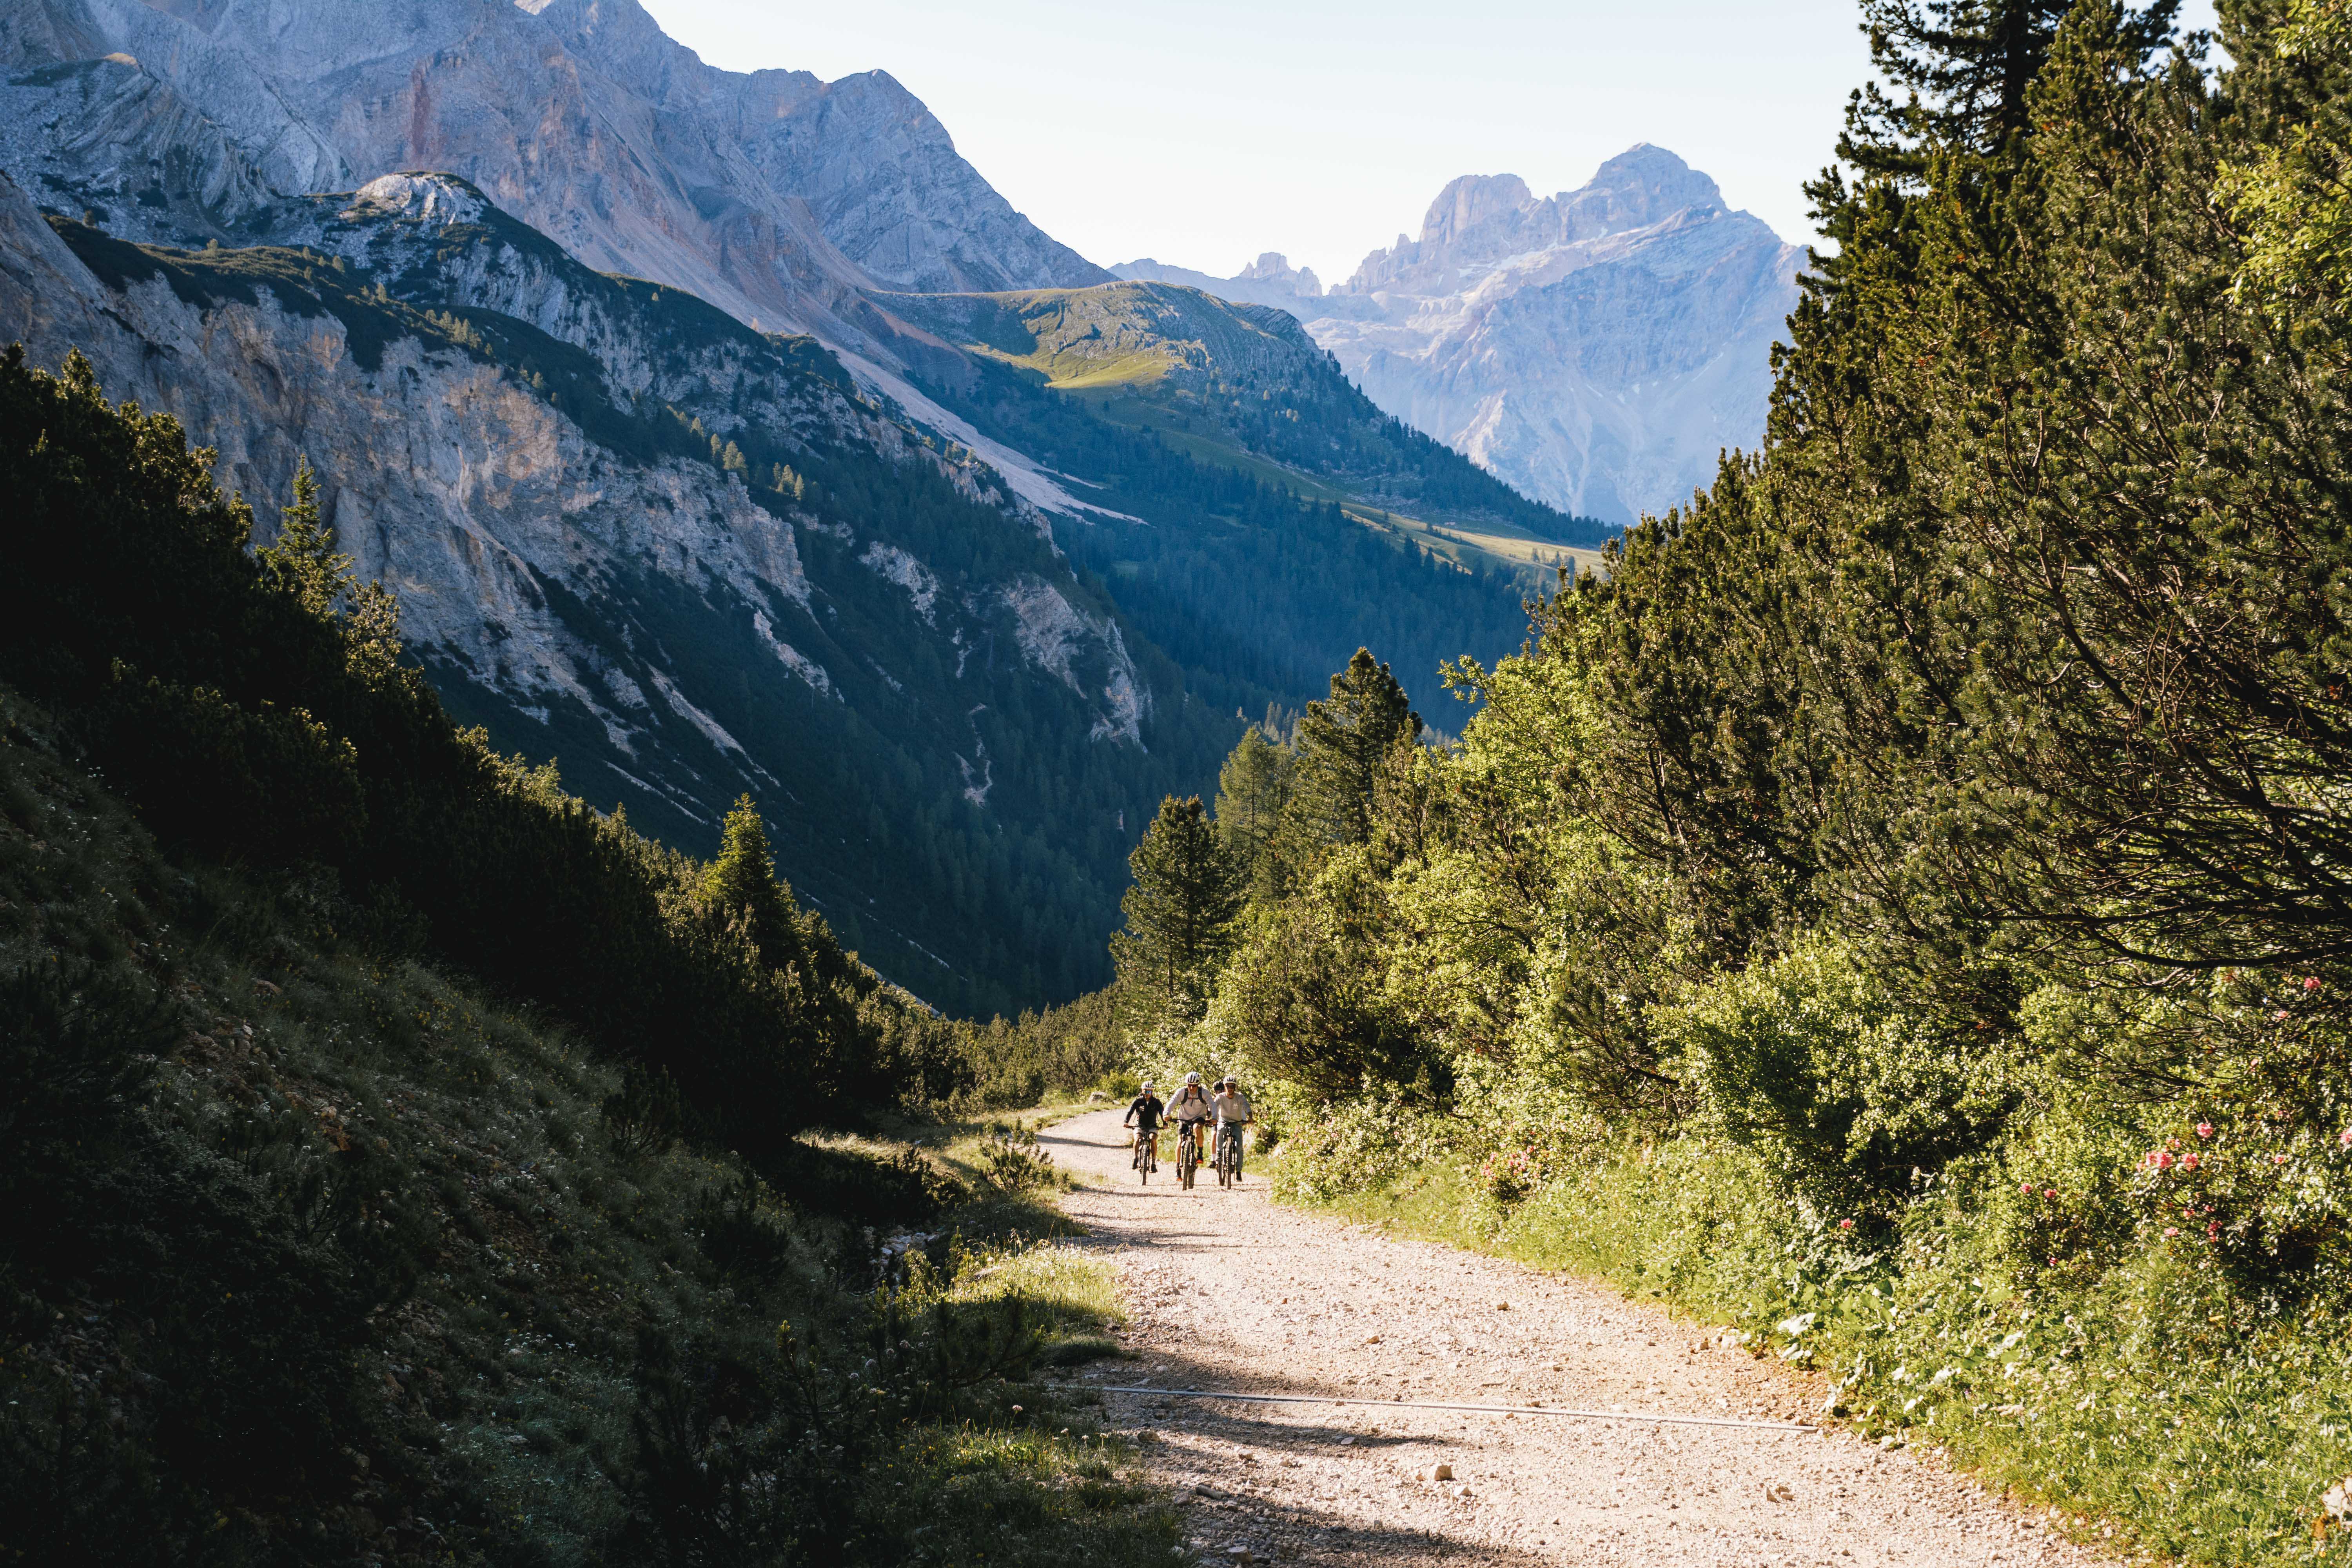 Three people ascending an uphill dirt path on mountain bikes in the Dolomites